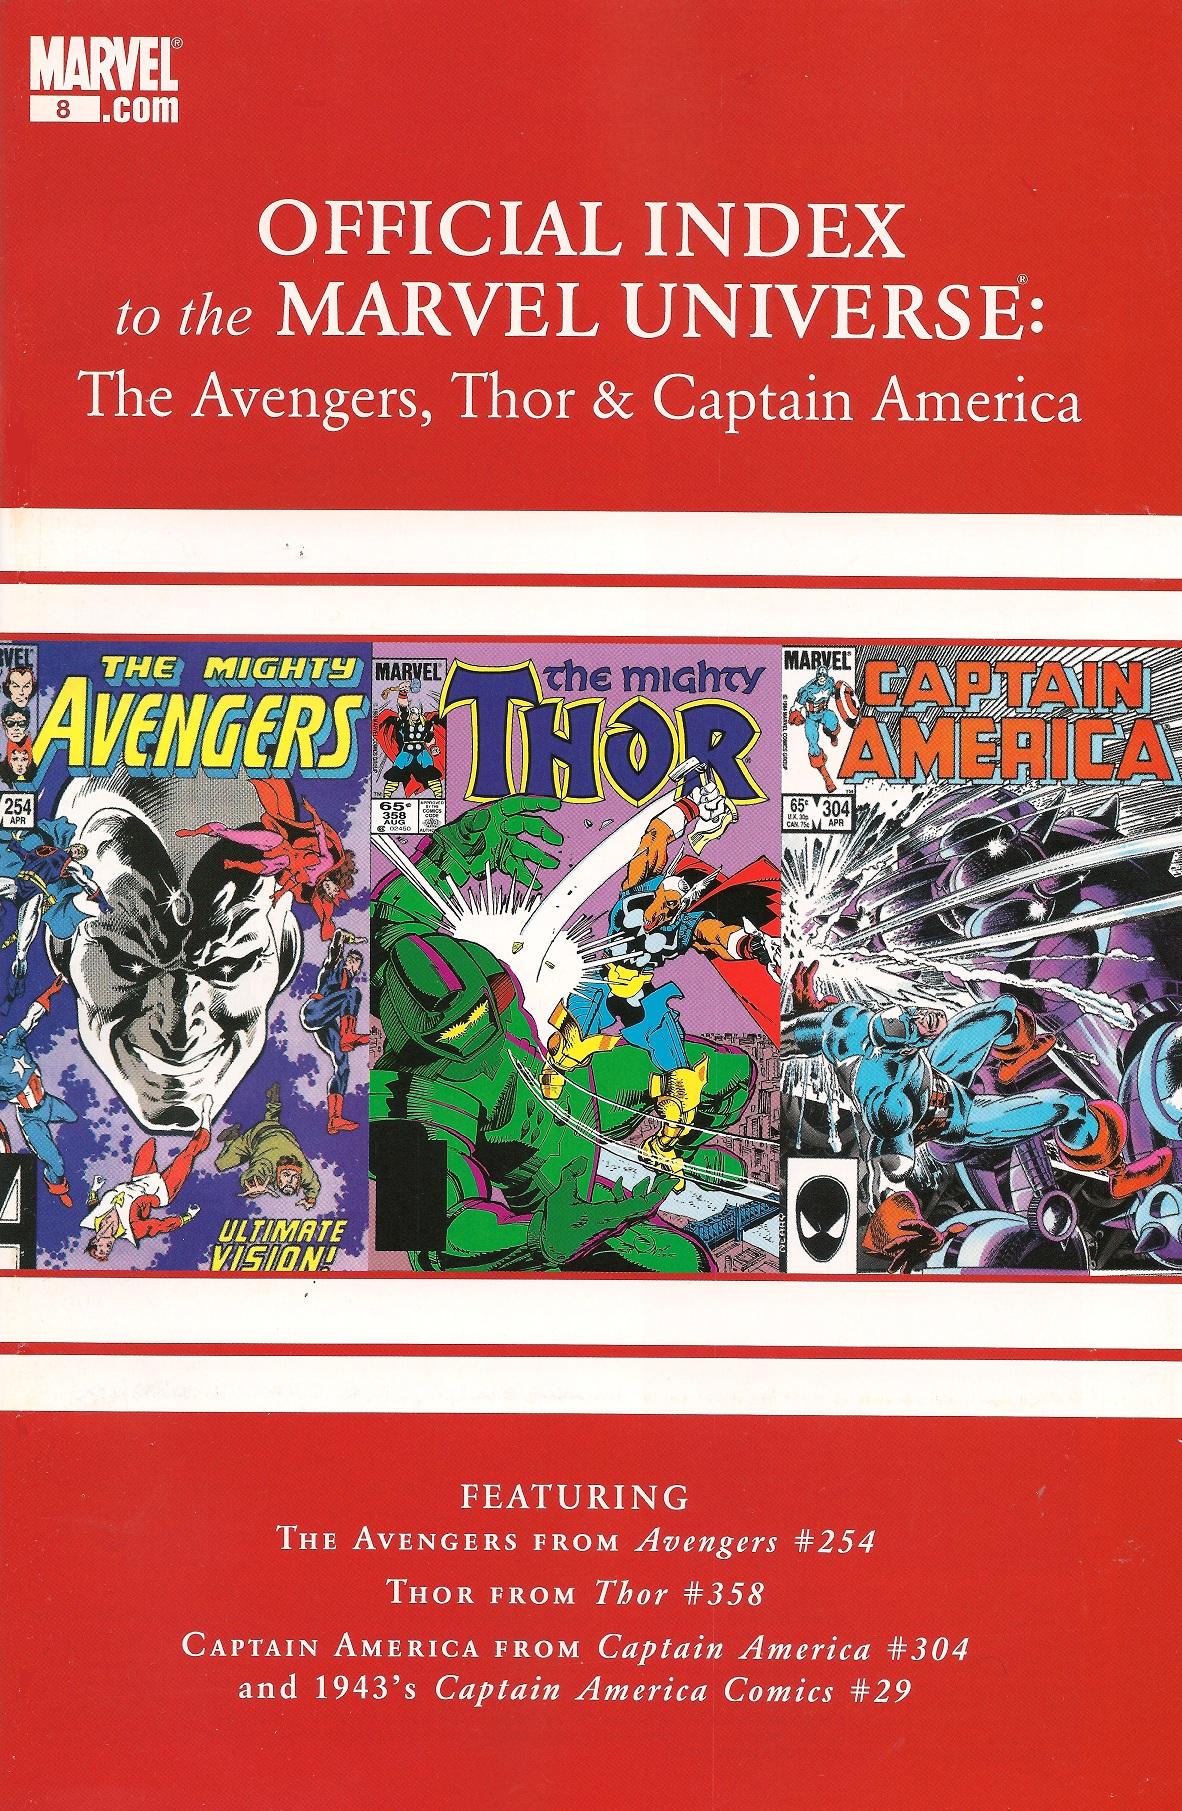 Avengers, Thor & Captain America: Official Index to the Marvel Universe Vol. 1 #8